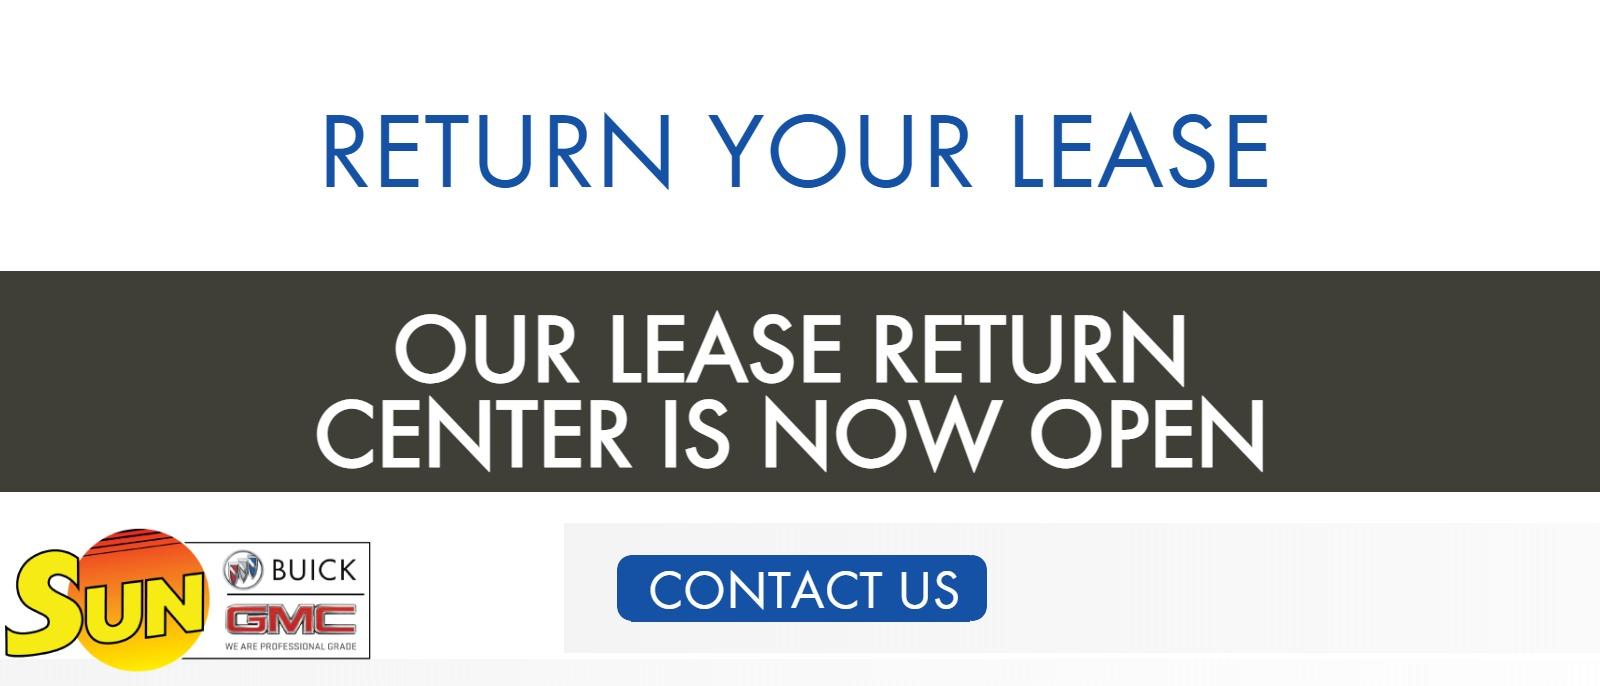 Return Your Lease
Our Lease Return Center is Now Open